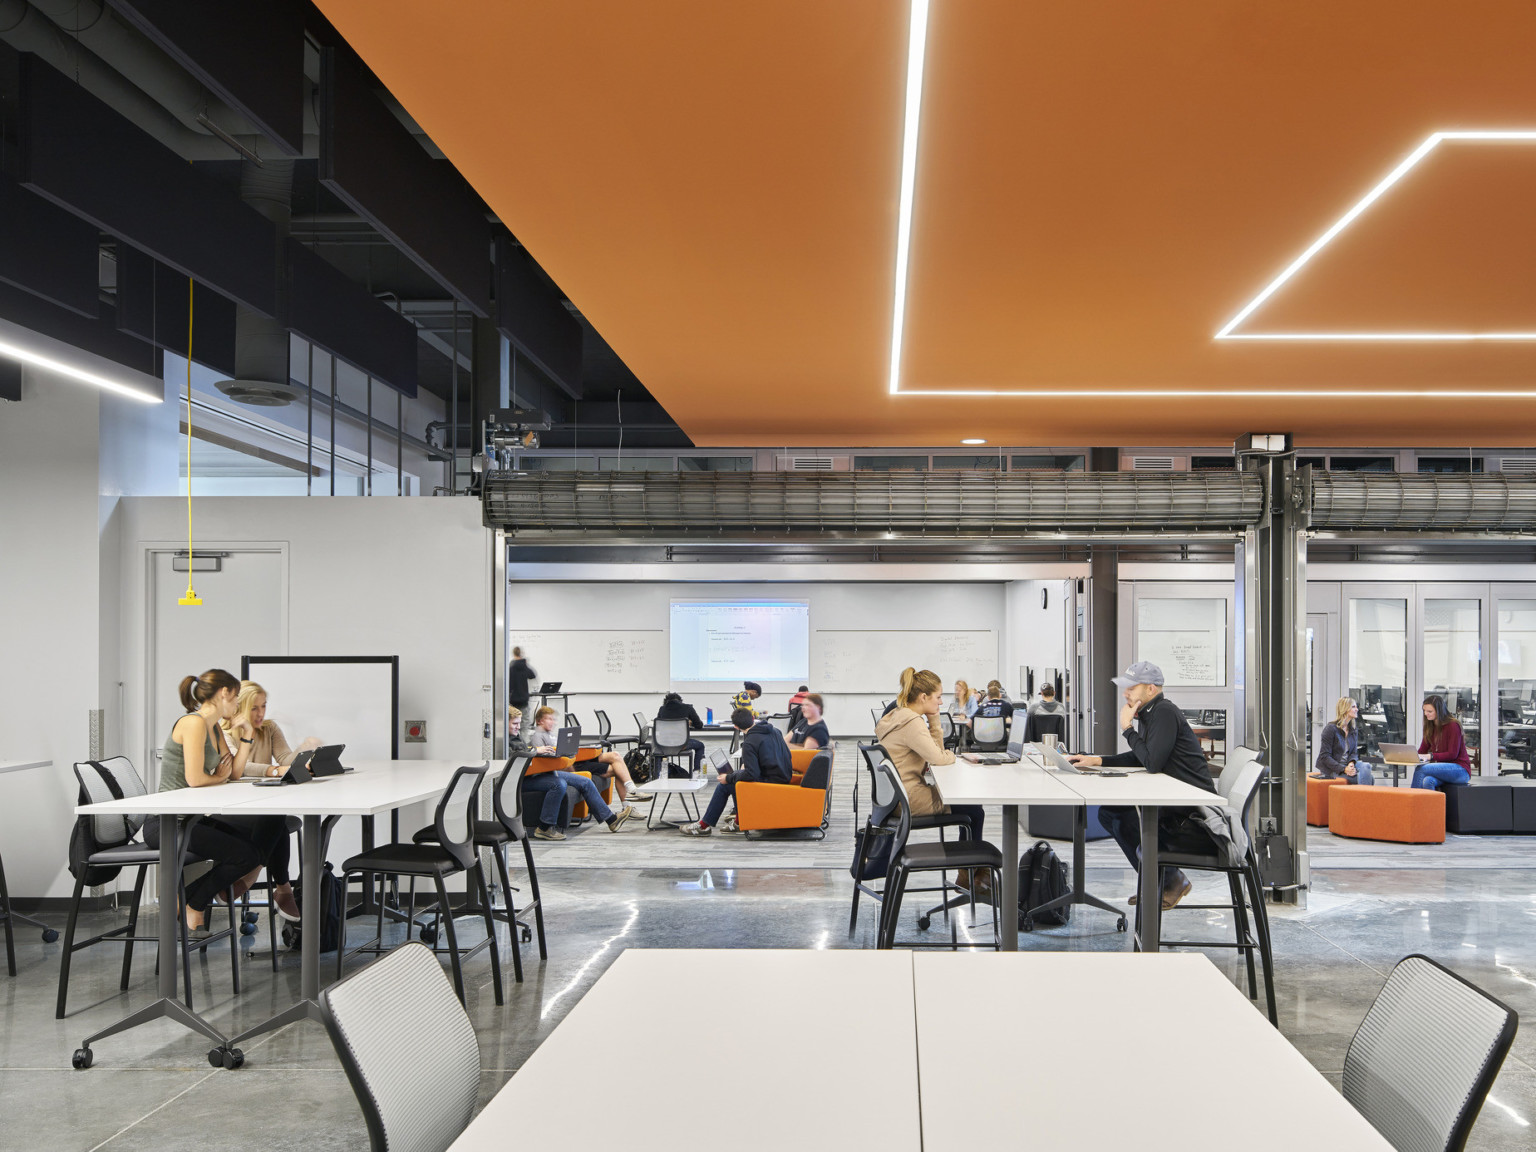 Large commons space with seating under a black ceiling and a geometric orange drop ceiling detail with recessed lights